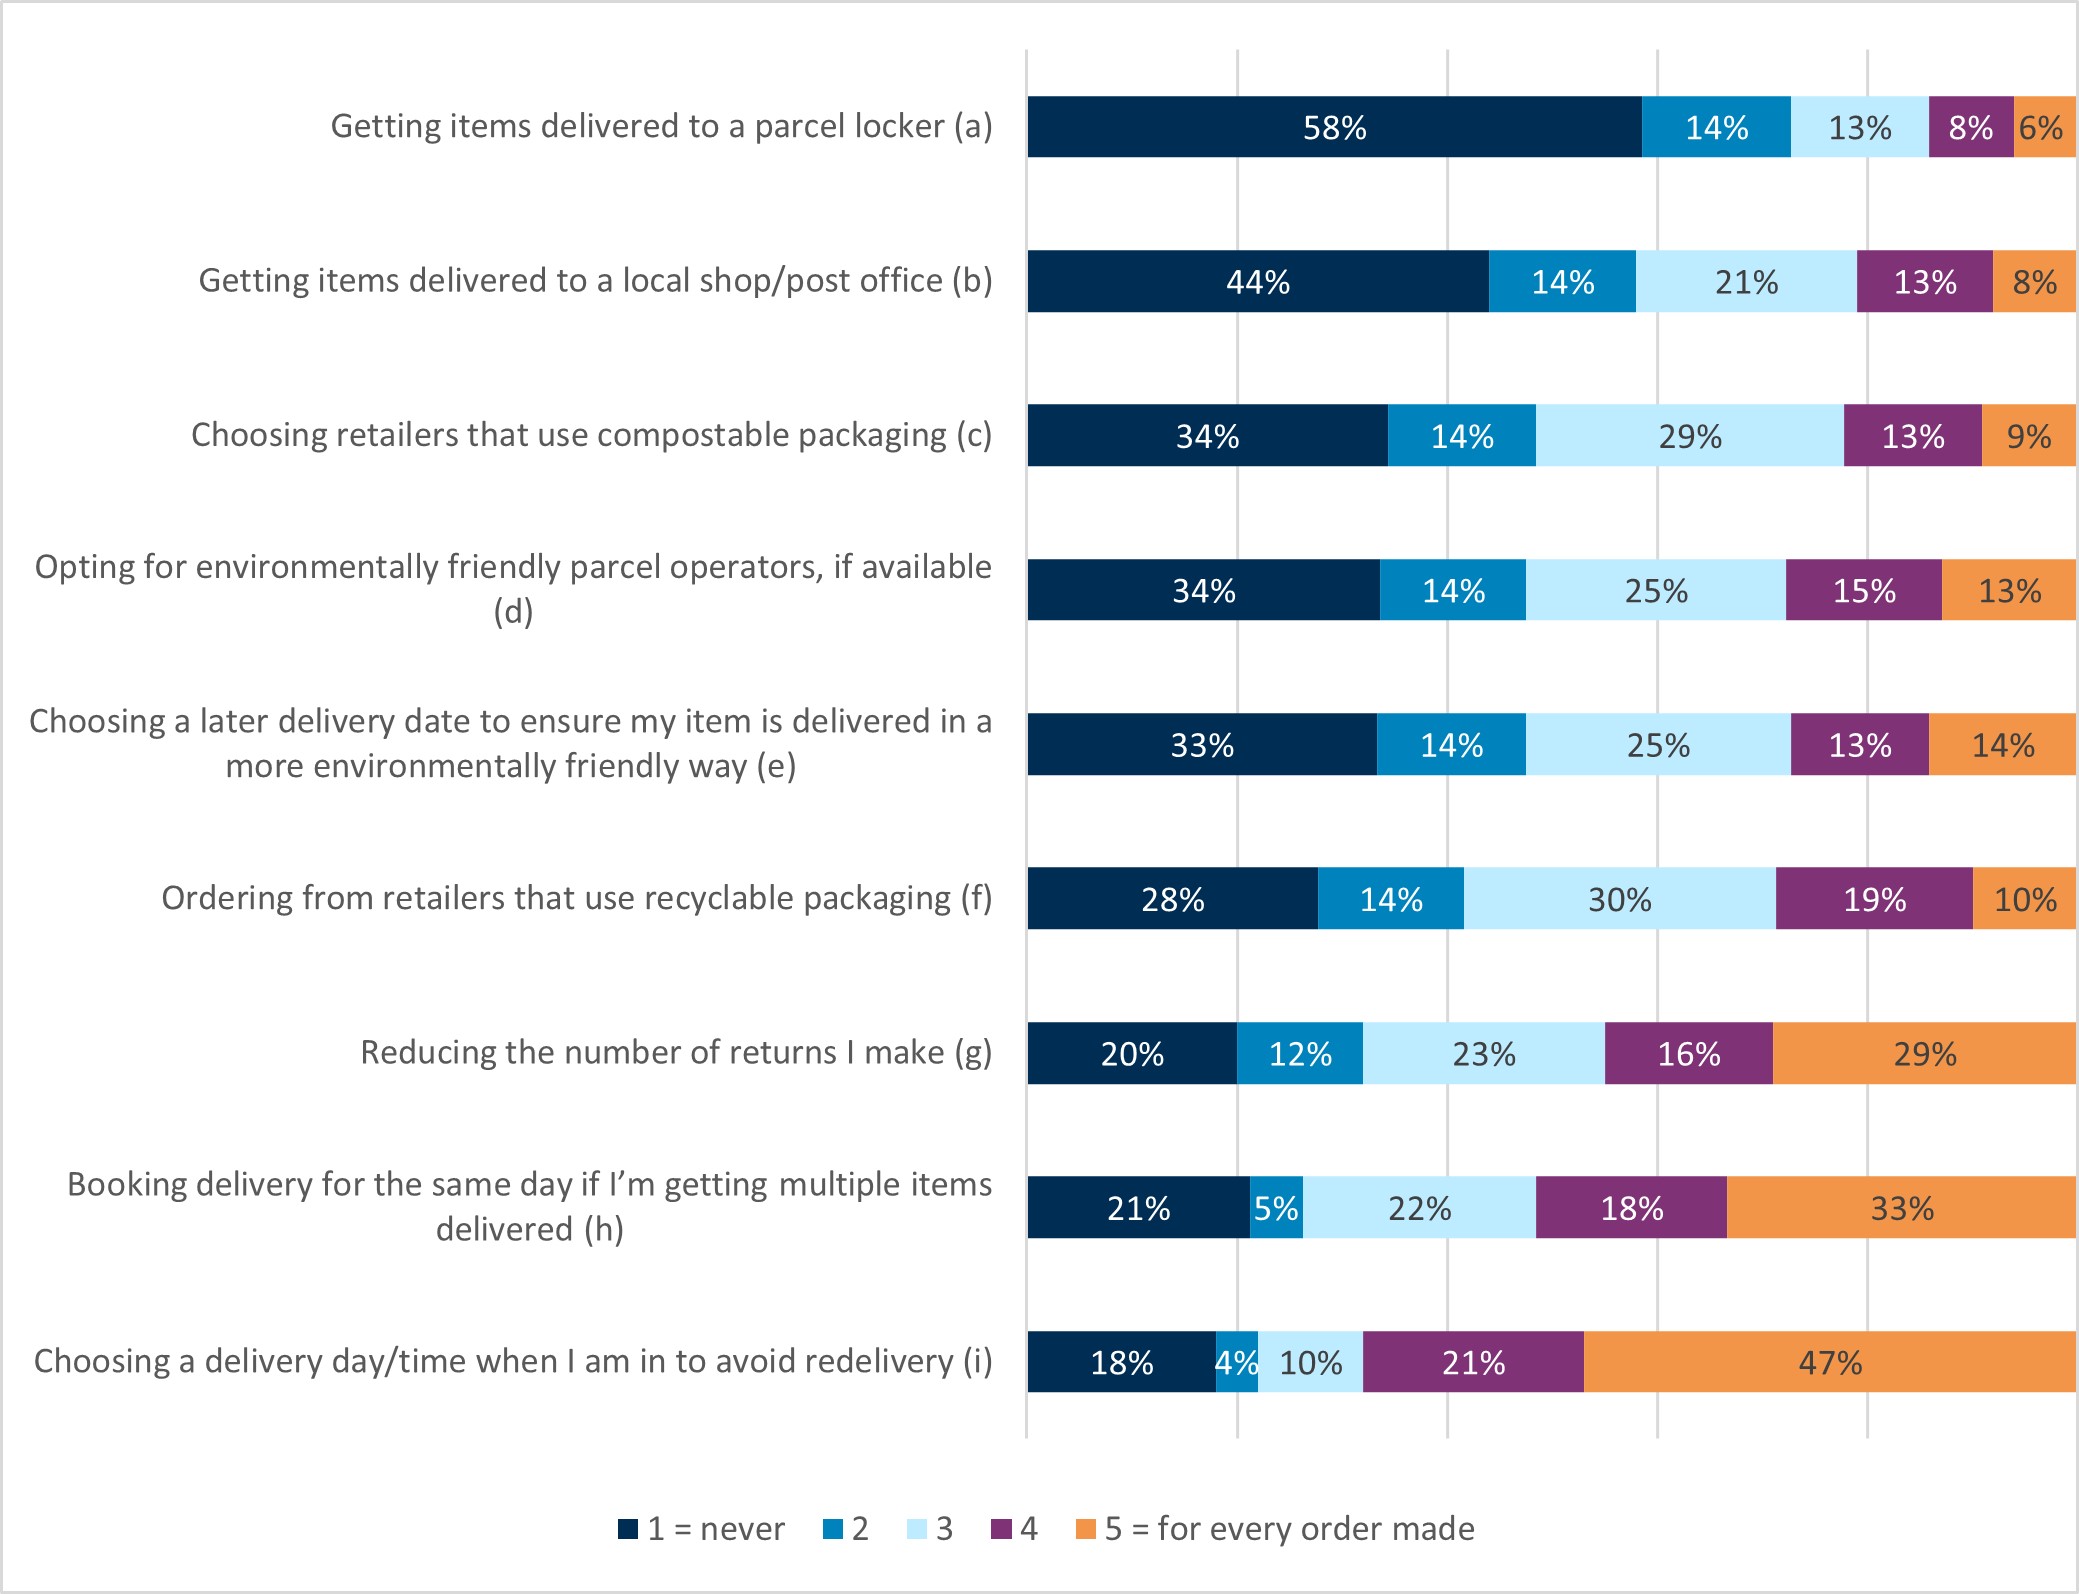 Data showing 58% of respondents state they never look to have items delivered to a parcel locker. 44% never get items delivered to a local shop or post office. 34% never opt for environmentally friendly parcel operators. 34% never choose retailers that use compostable packaging, 33% never choose a later delivery date. 47% report trying to avoid redelivery by choosing a delivery time. 33% aim to book delivery for multiple parcels on the same day, and29% reduce the number of returns they make for each order